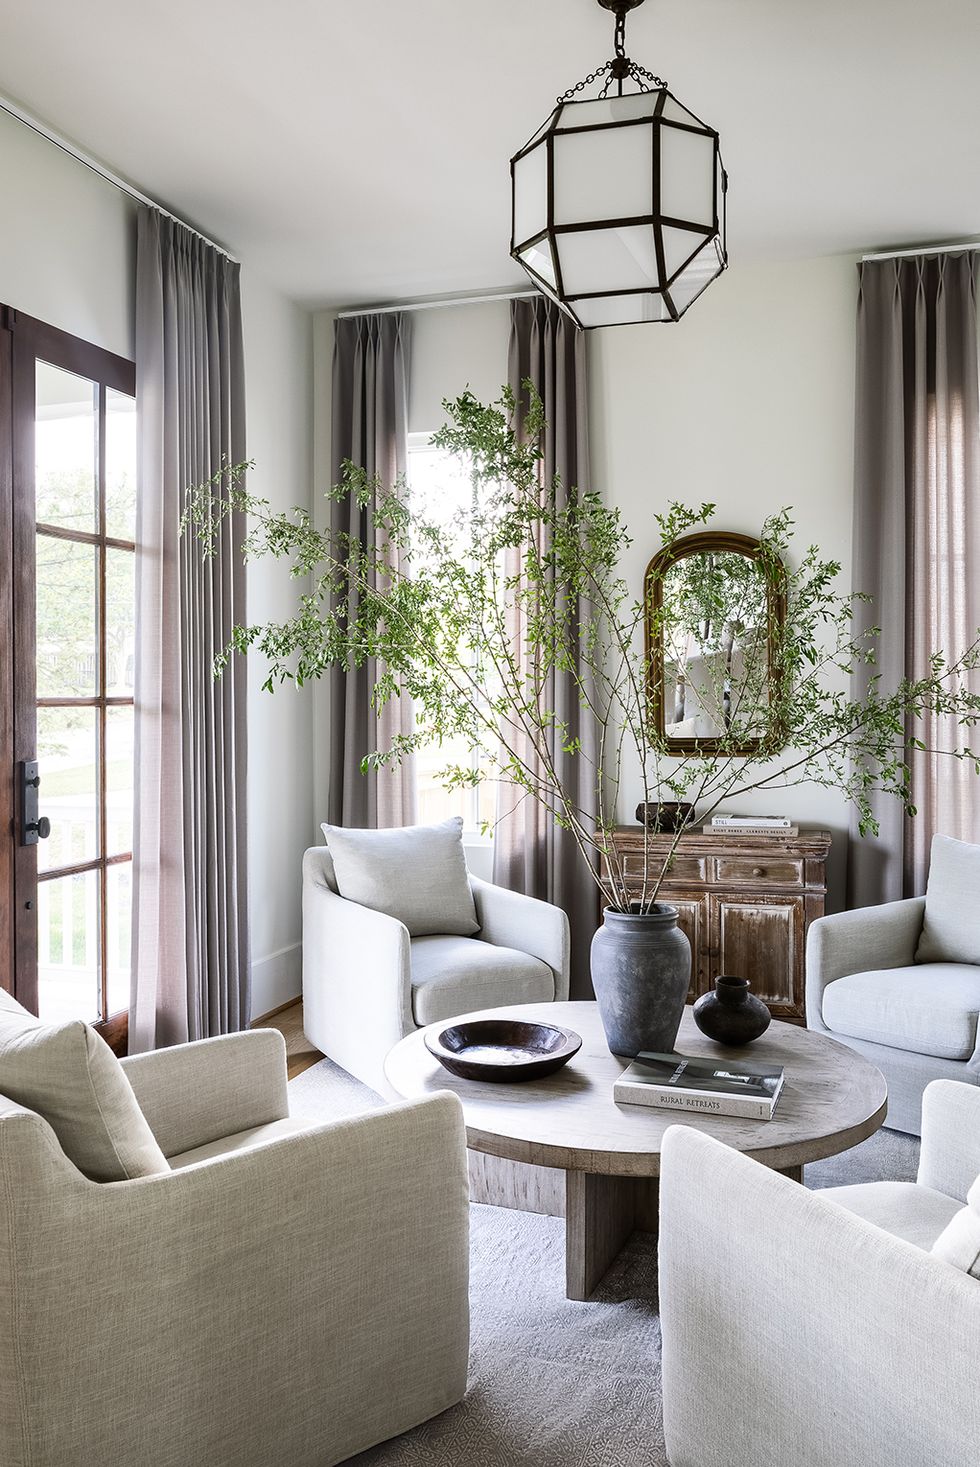 22 Living Room Curtain Ideas For Your Home